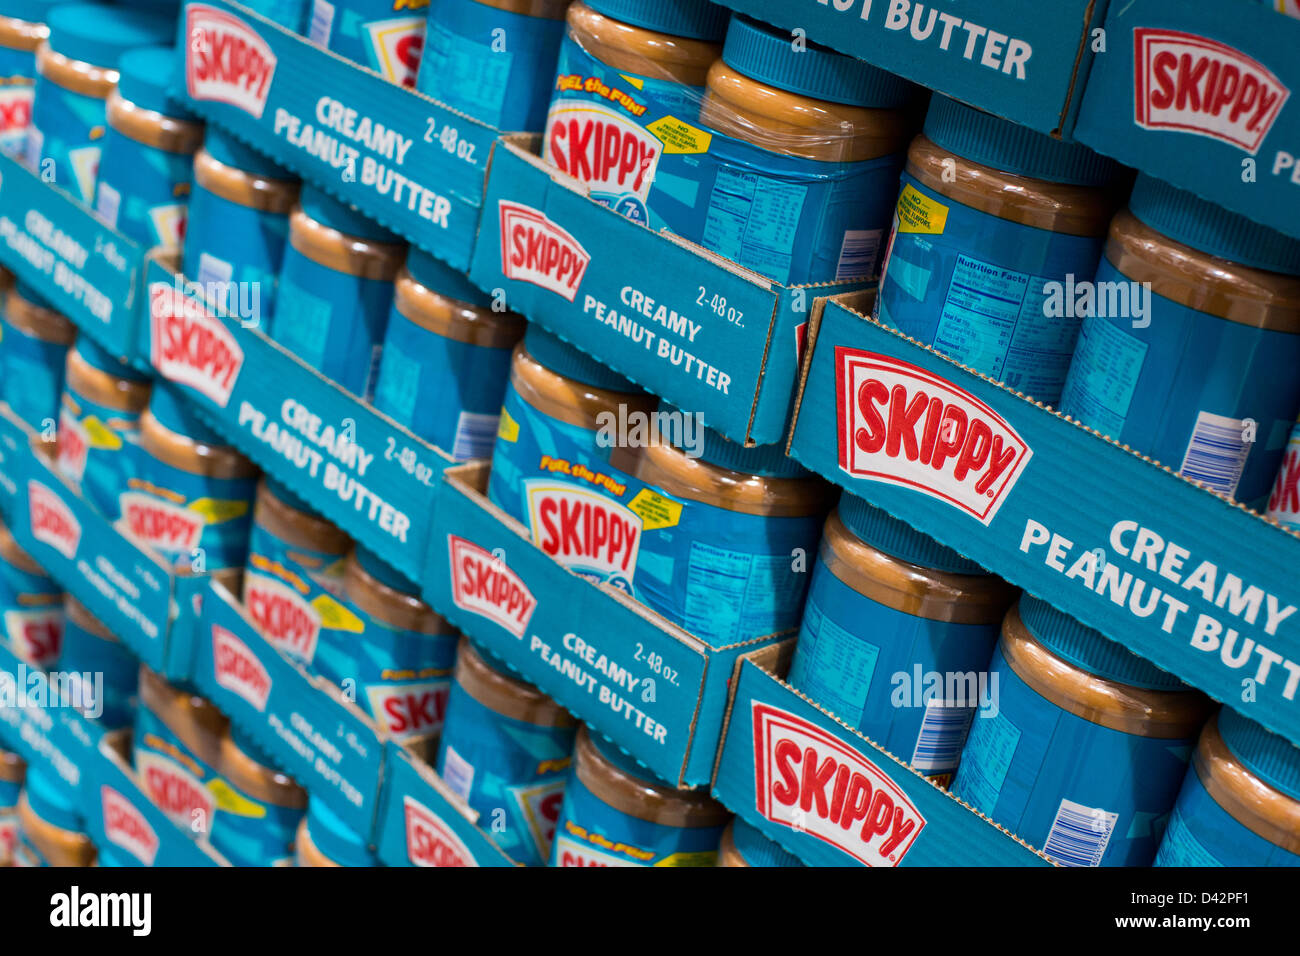 Skippy peanut butter on display at a Costco Wholesale Warehouse Club. Stock Photo